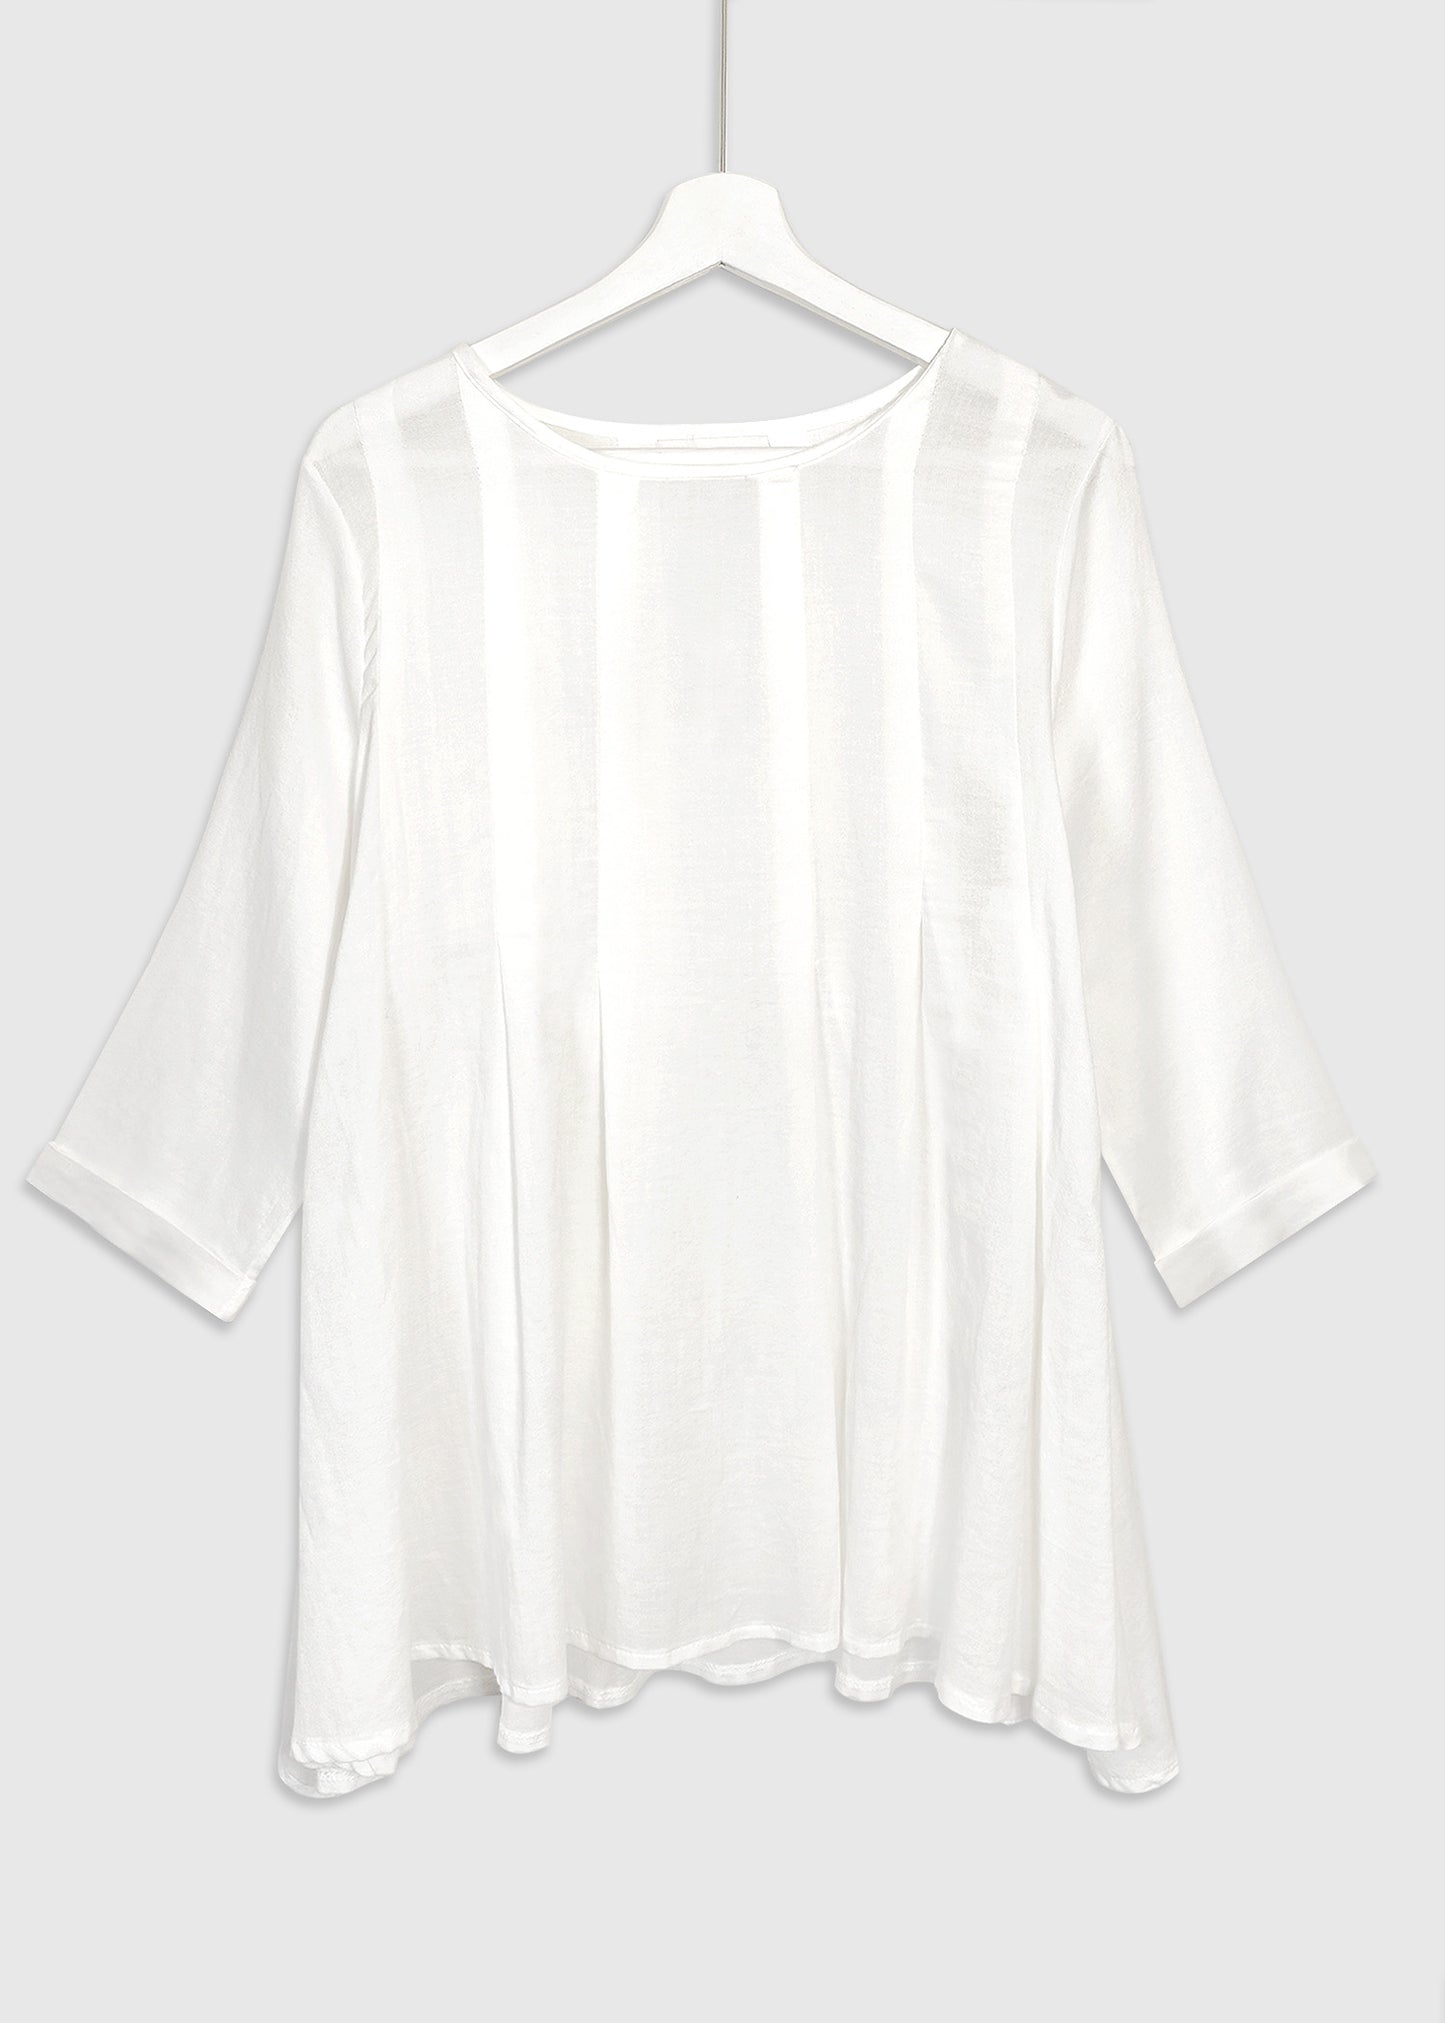 LILY Pleated Tunic Top